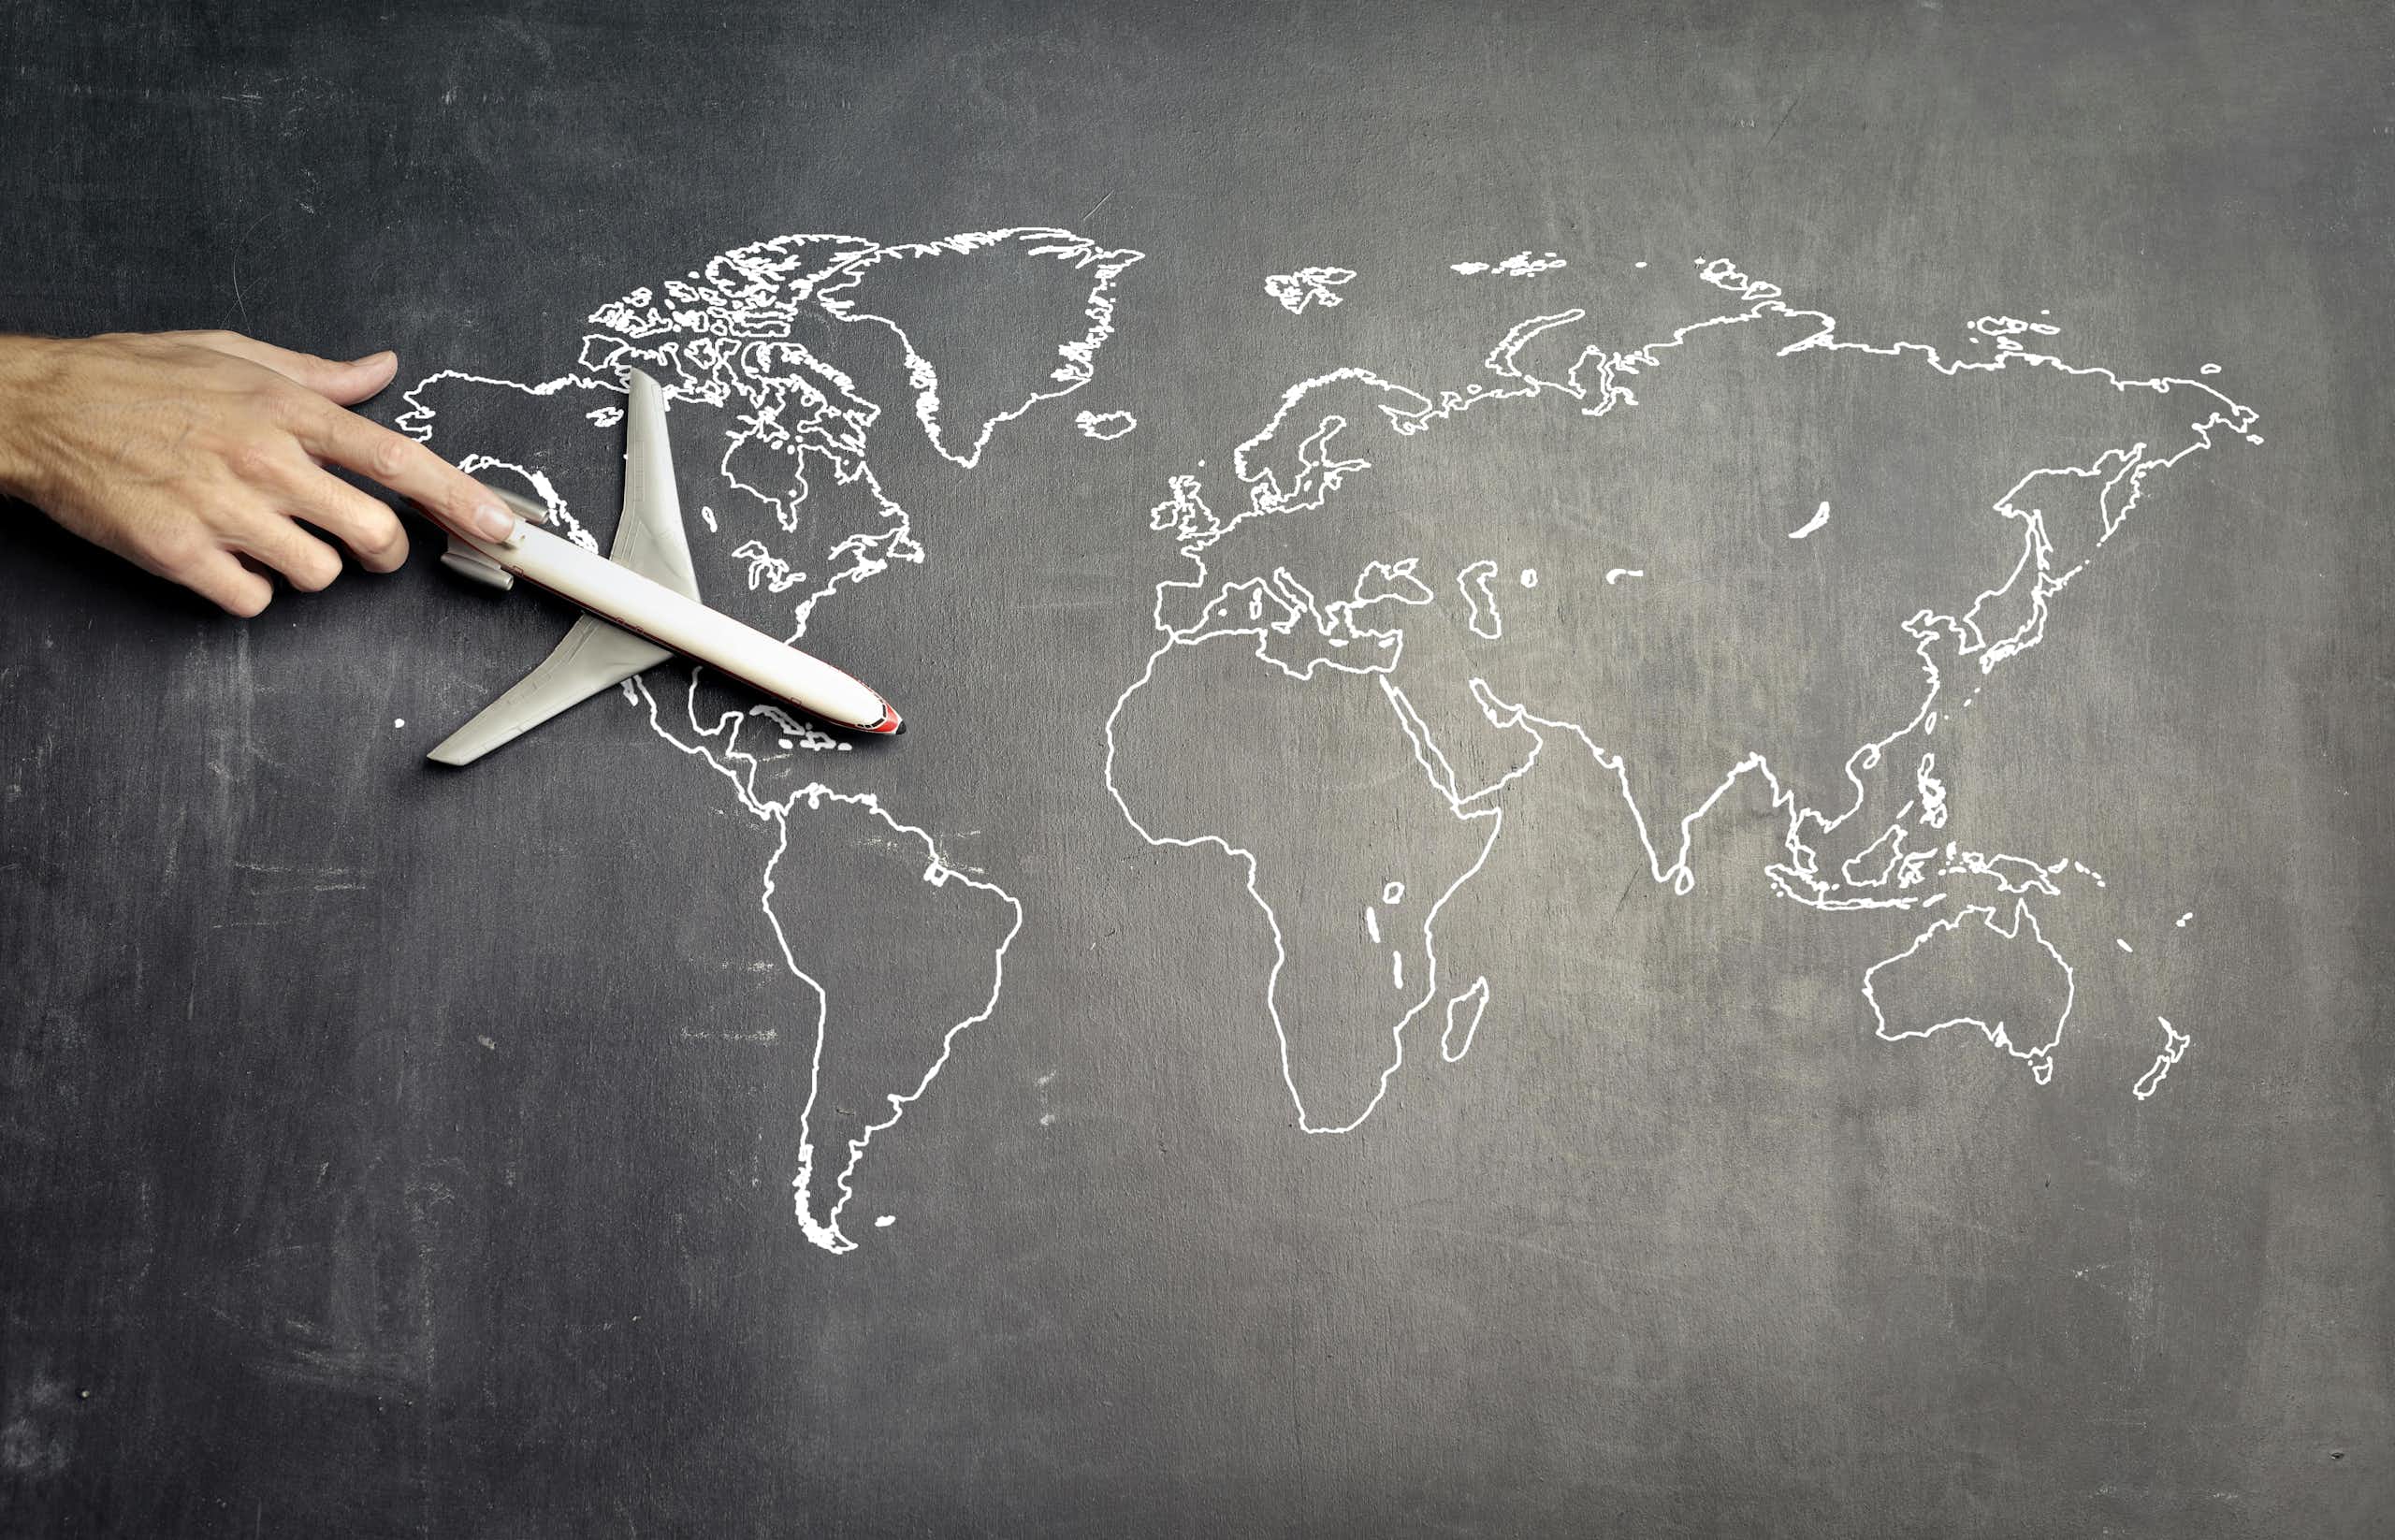 A hand pushes a toy plane over a world map on a blackboard